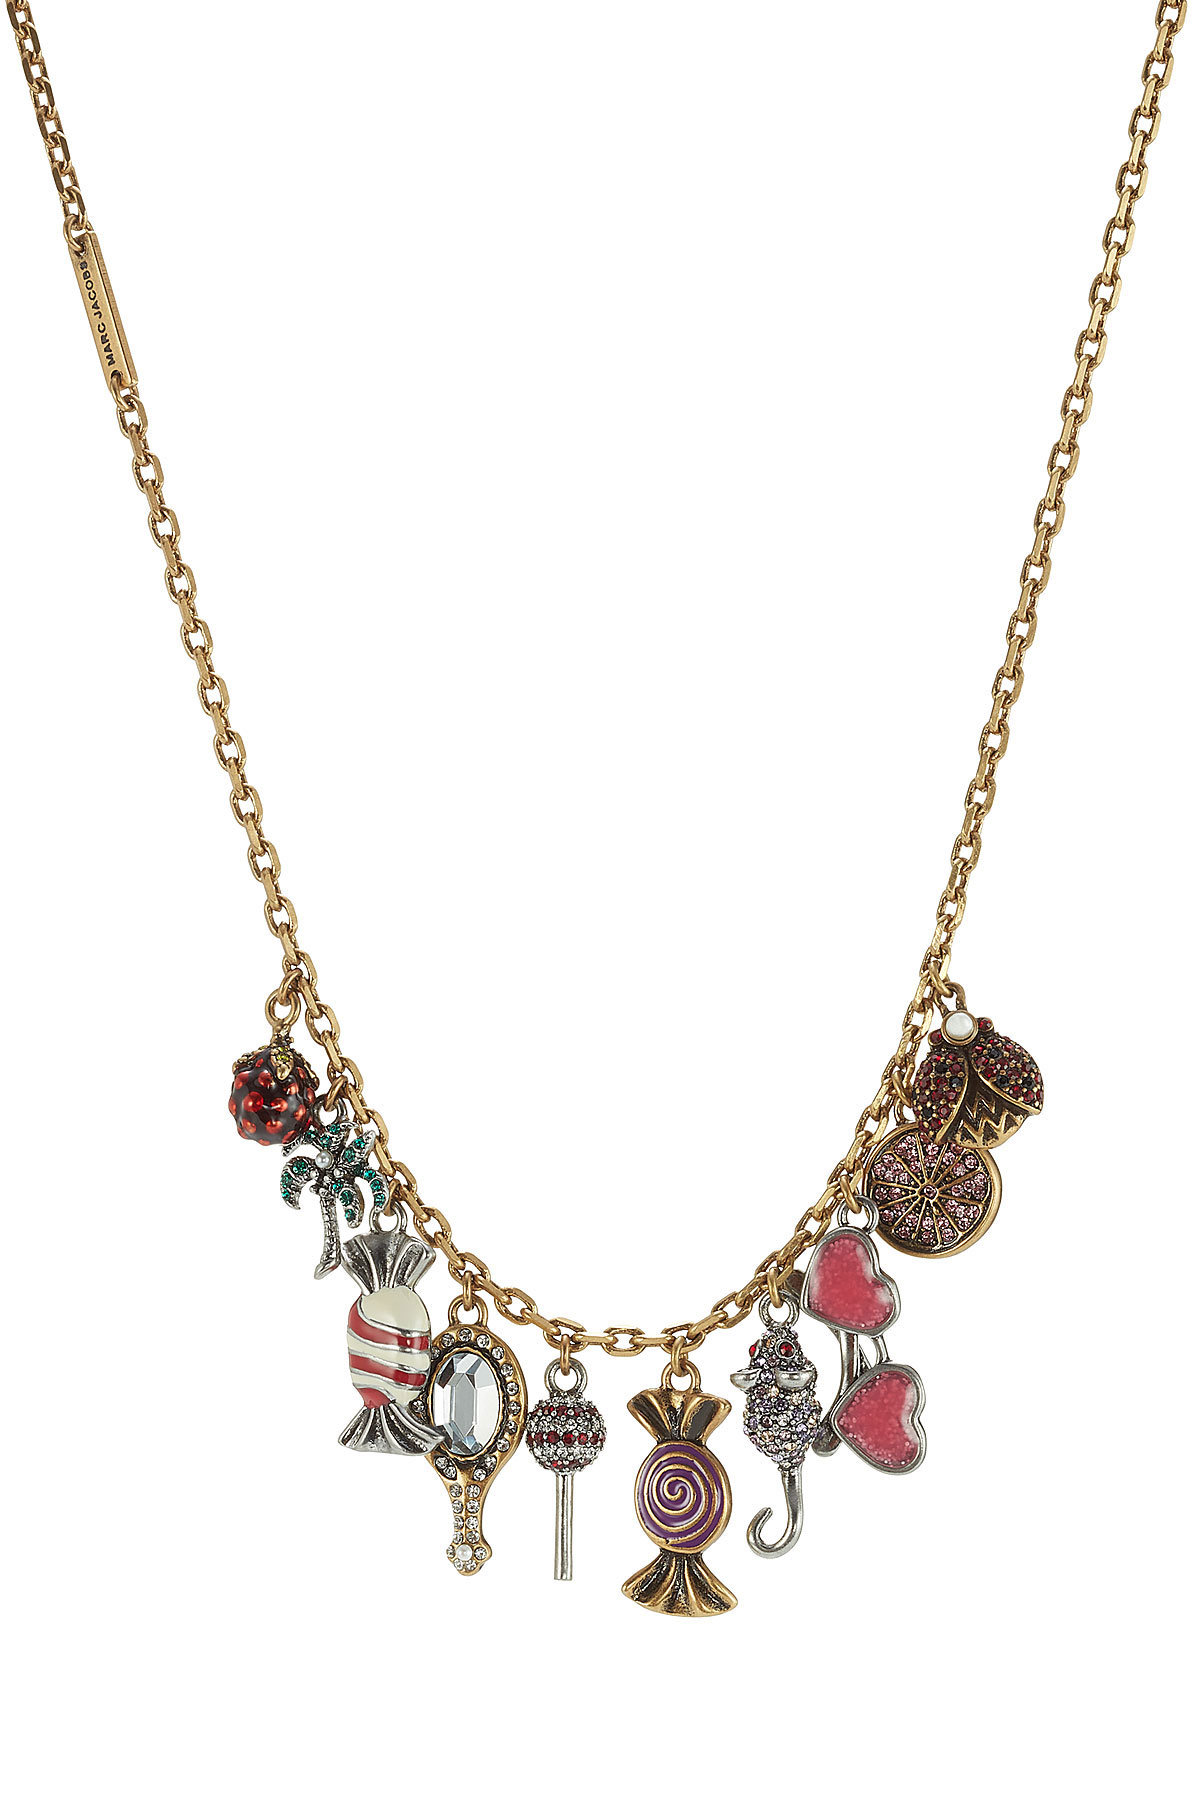 Marc Jacobs - Charms Poolside Chain Necklace with Embellishment